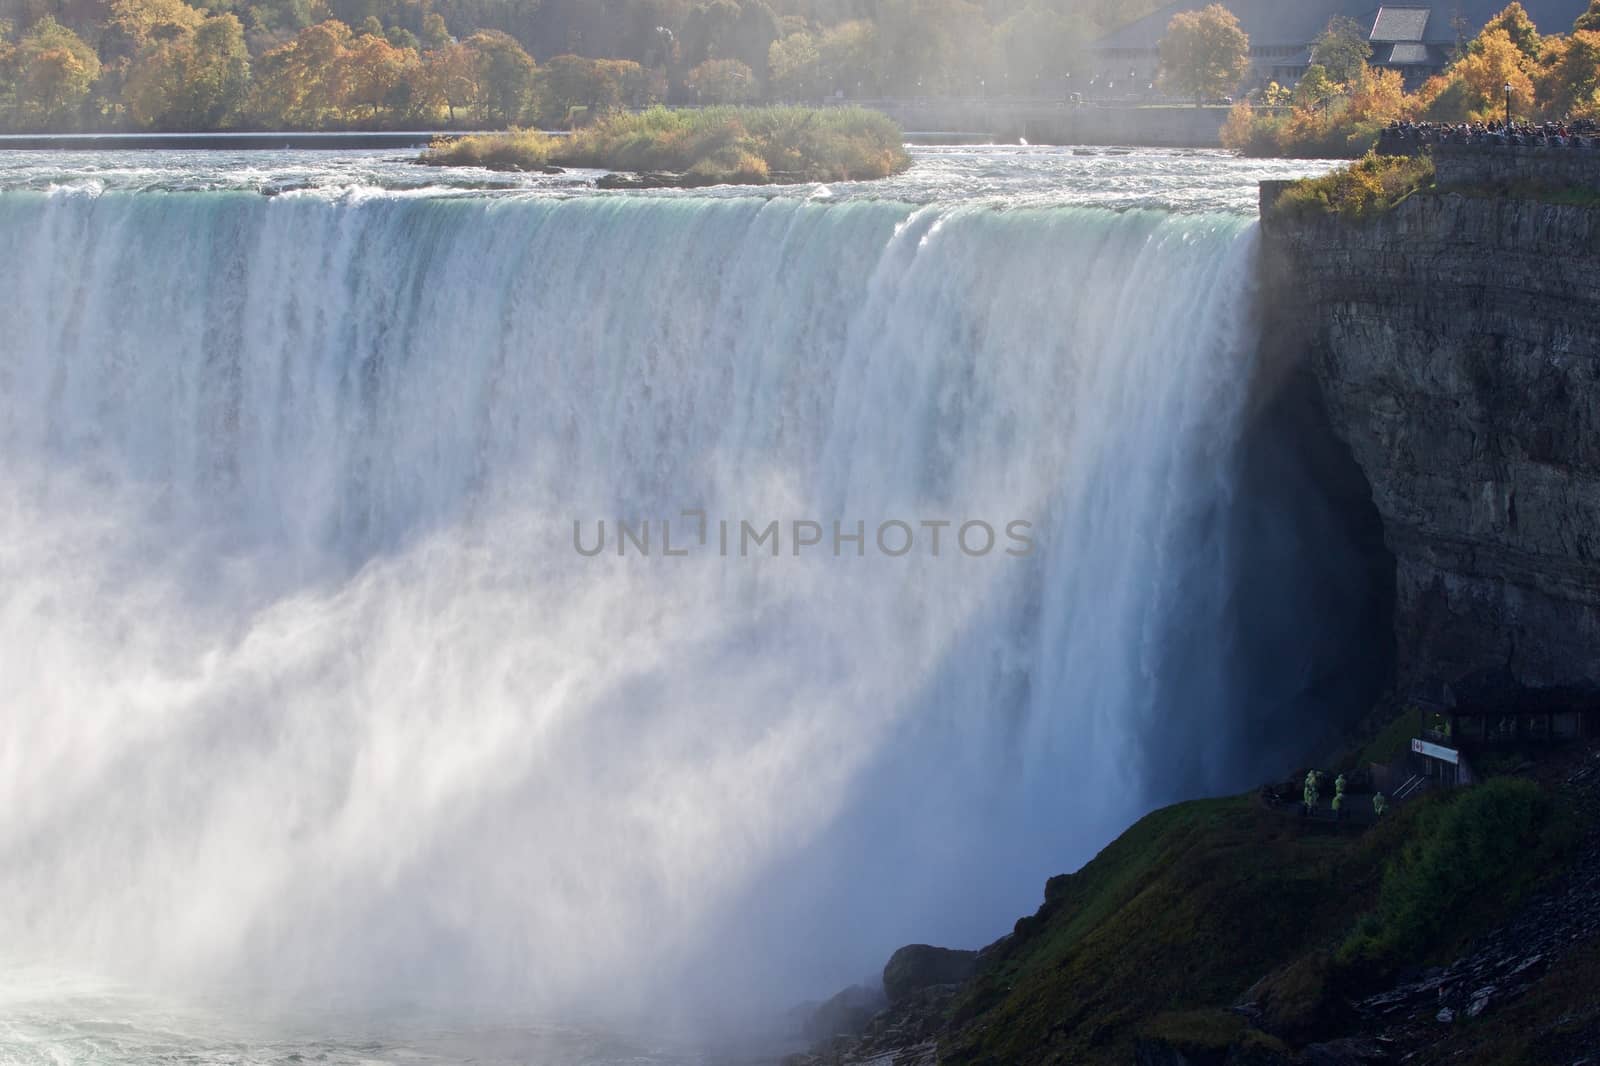 Beautiful picture with amazing Niagara waterfall, the mist, and viewpoints by teo